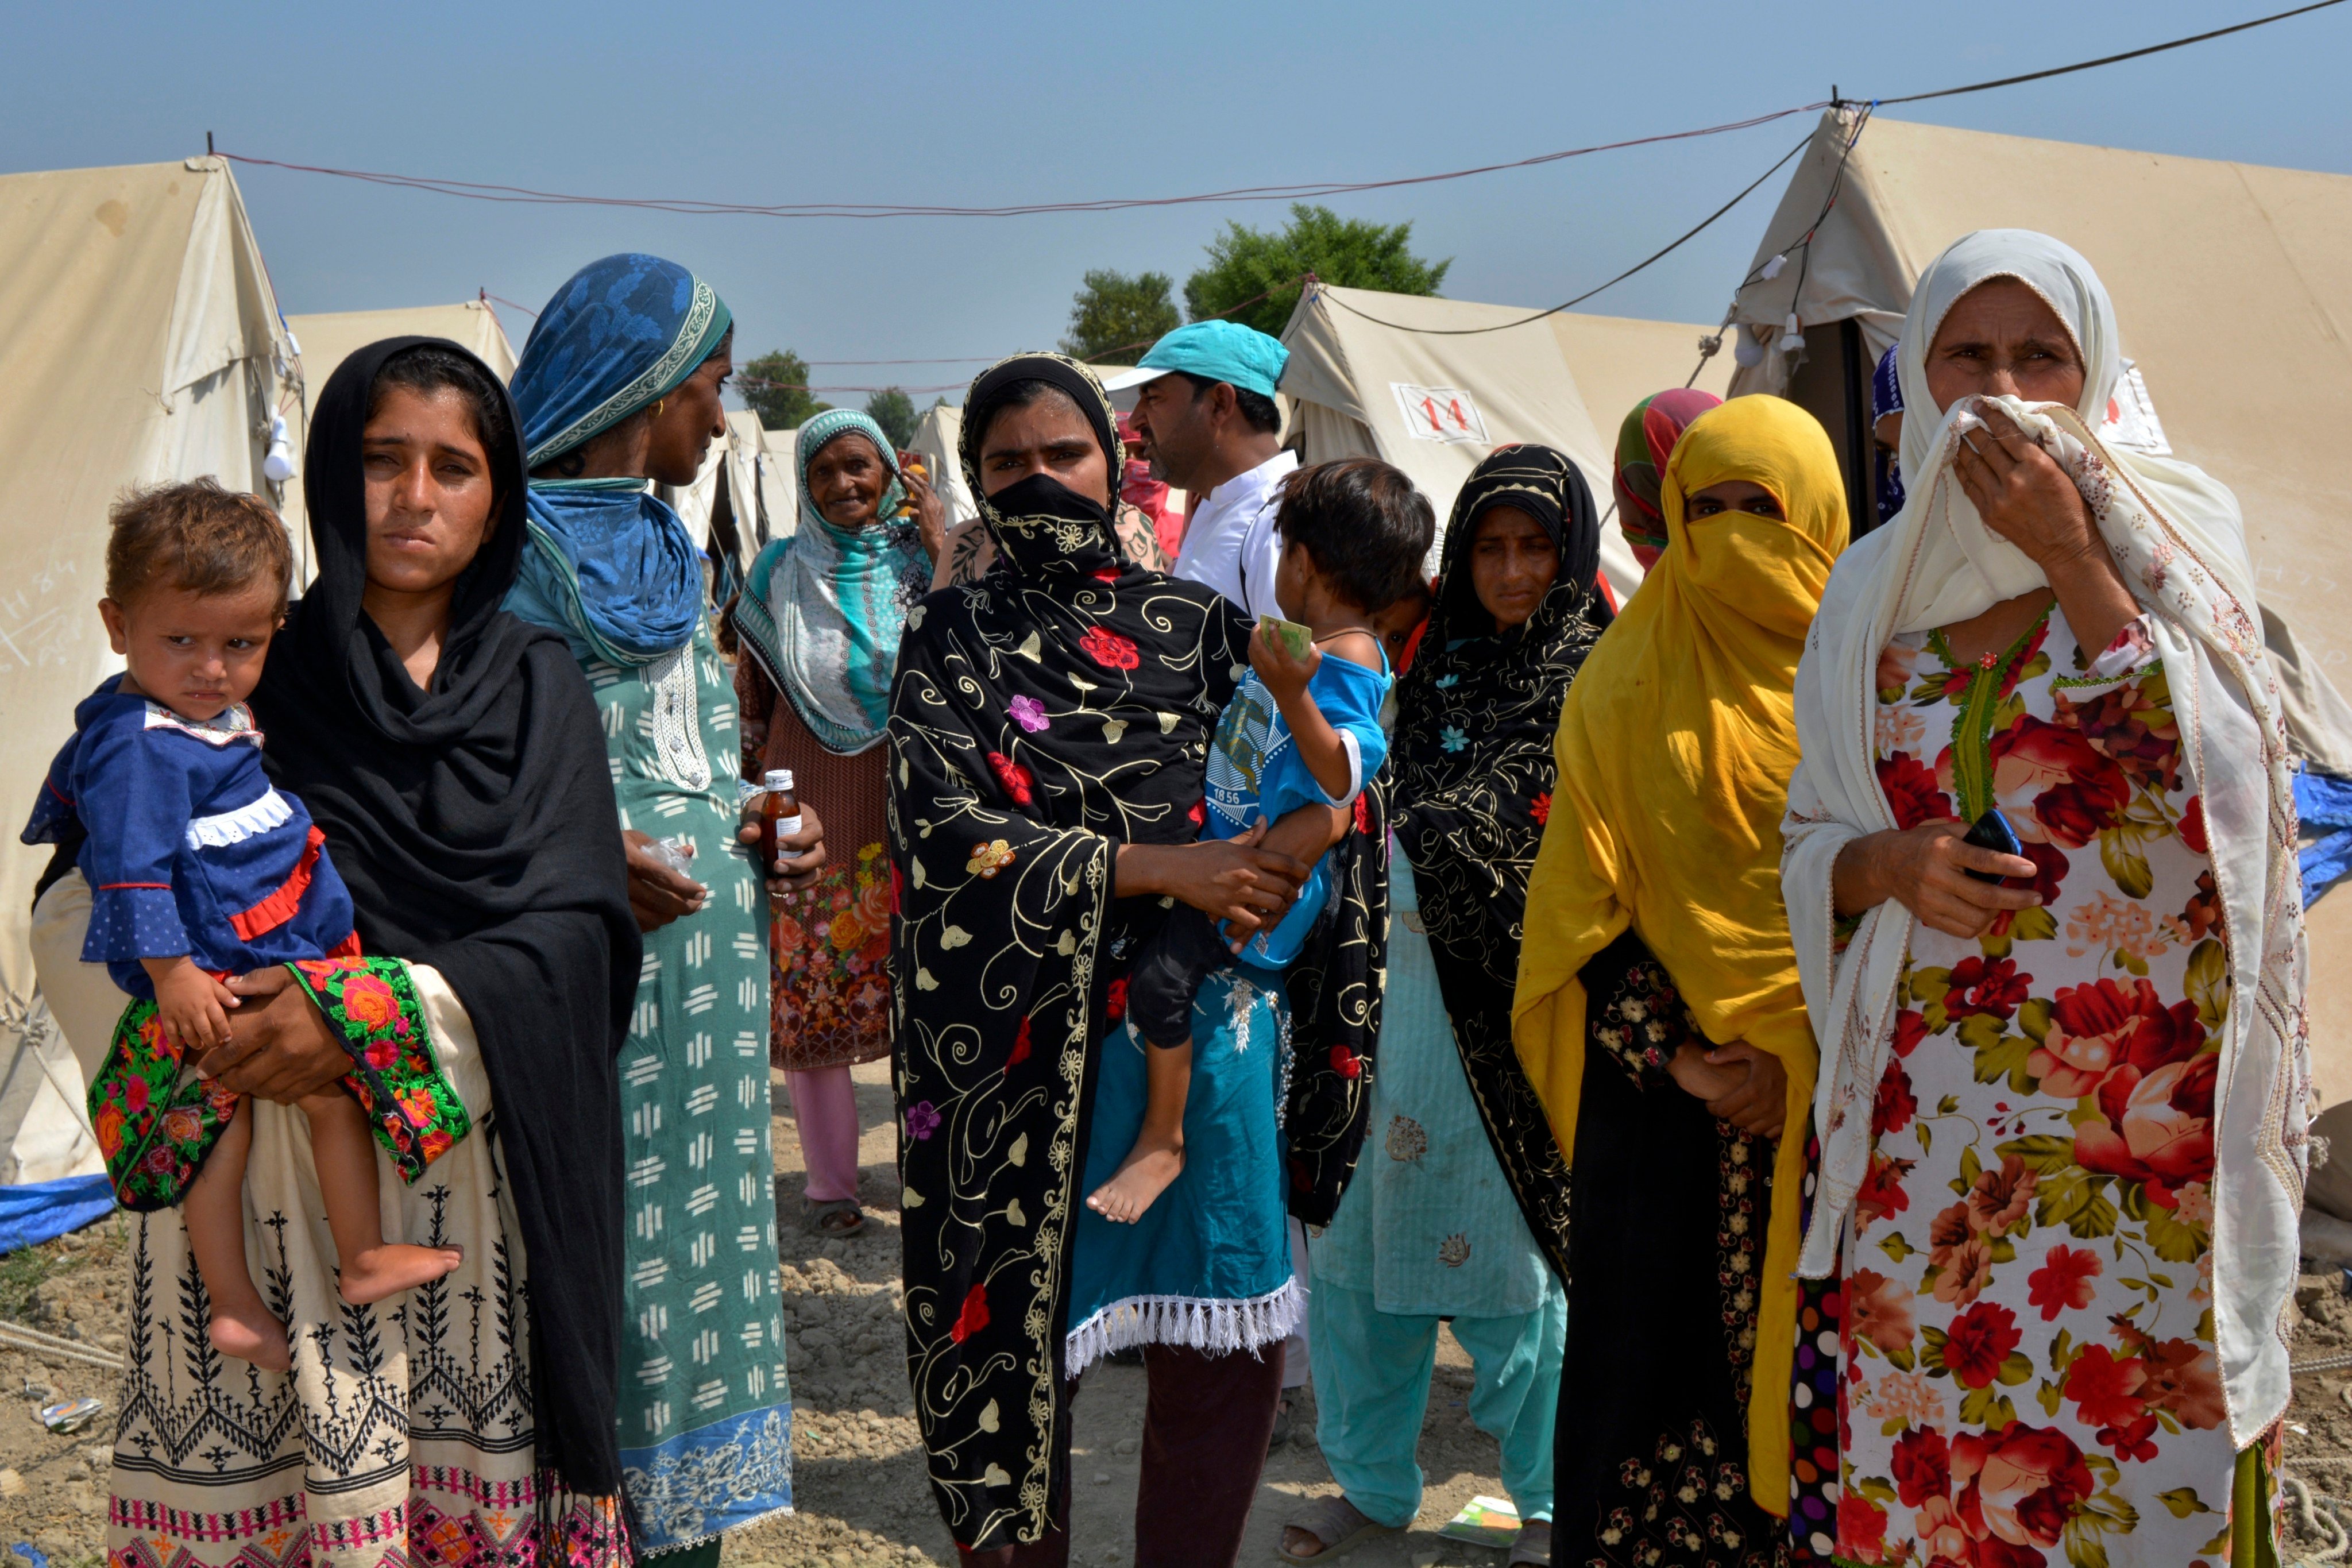 The trend of underage marriages in Pakistan adds to the woes affecting flood-hit areas. According to UNICEF, 21 per cent of Pakistani girls marry before the age of 18, and three per cent before they turn 15. Photo: AP